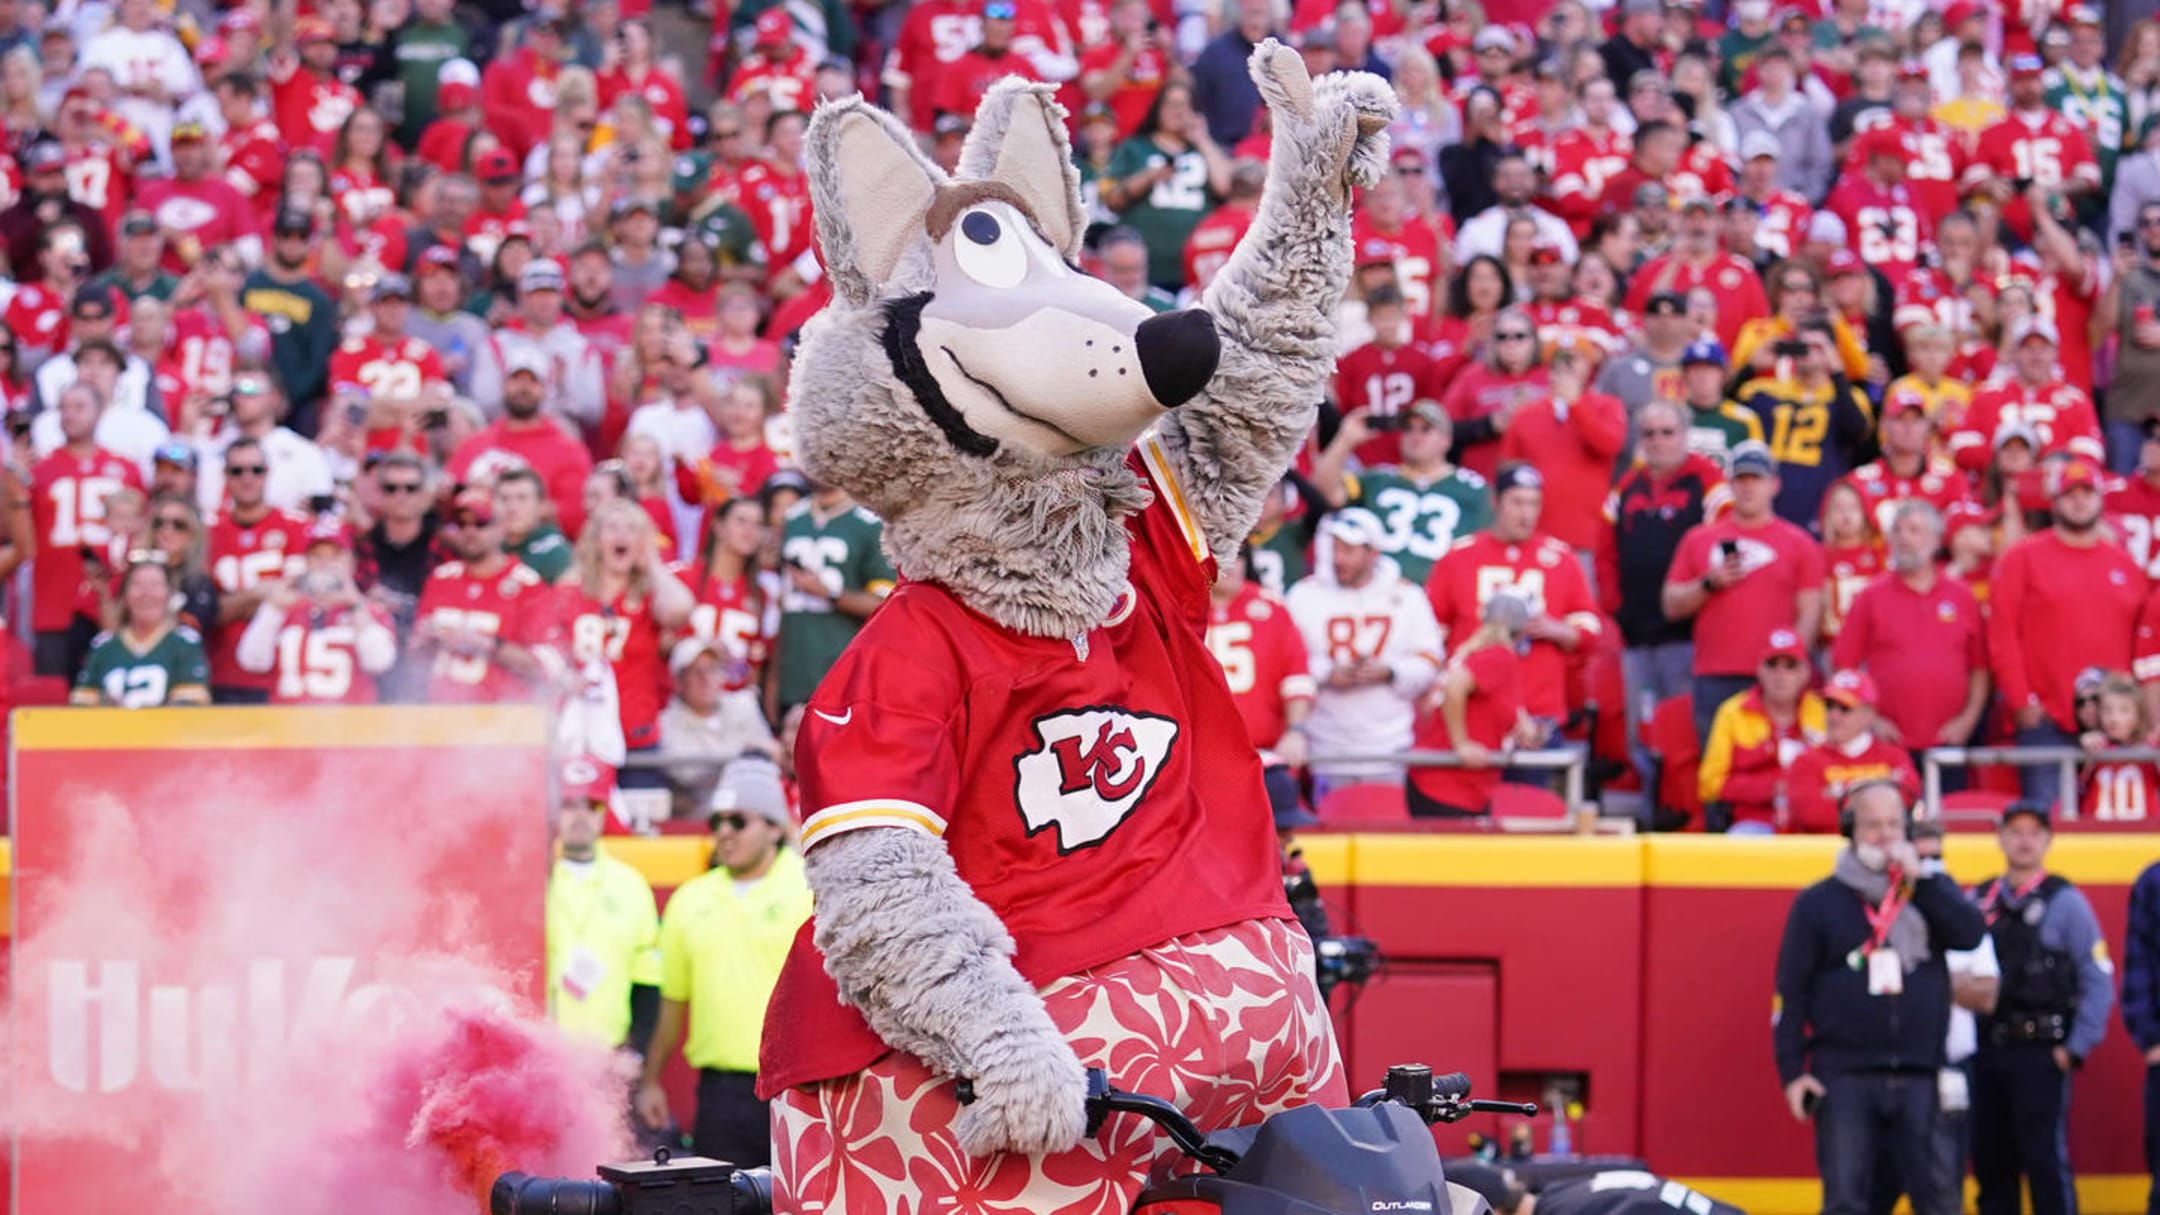 Kansas City Chiefs mascot bangs his head in frustration after